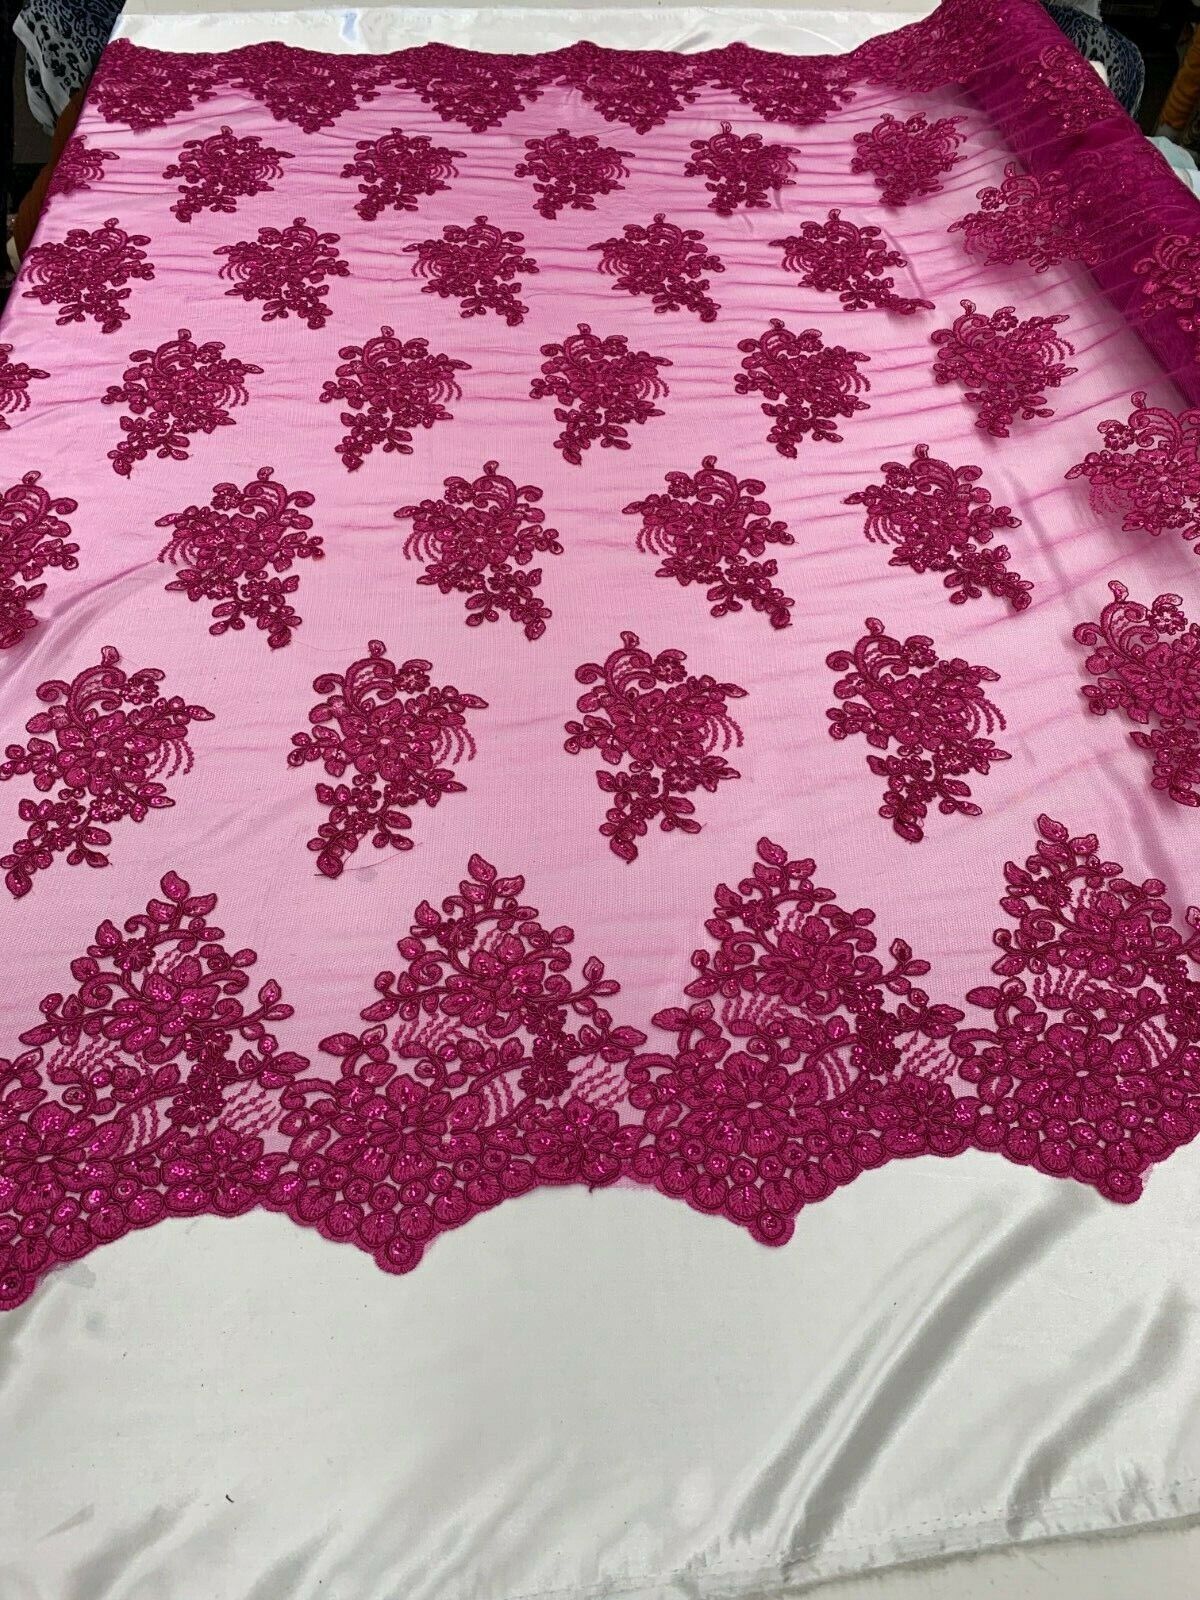 Lace Embroidered Flowers/Floral Fabric Sequins On Mesh (Fuchsia) By The Yard